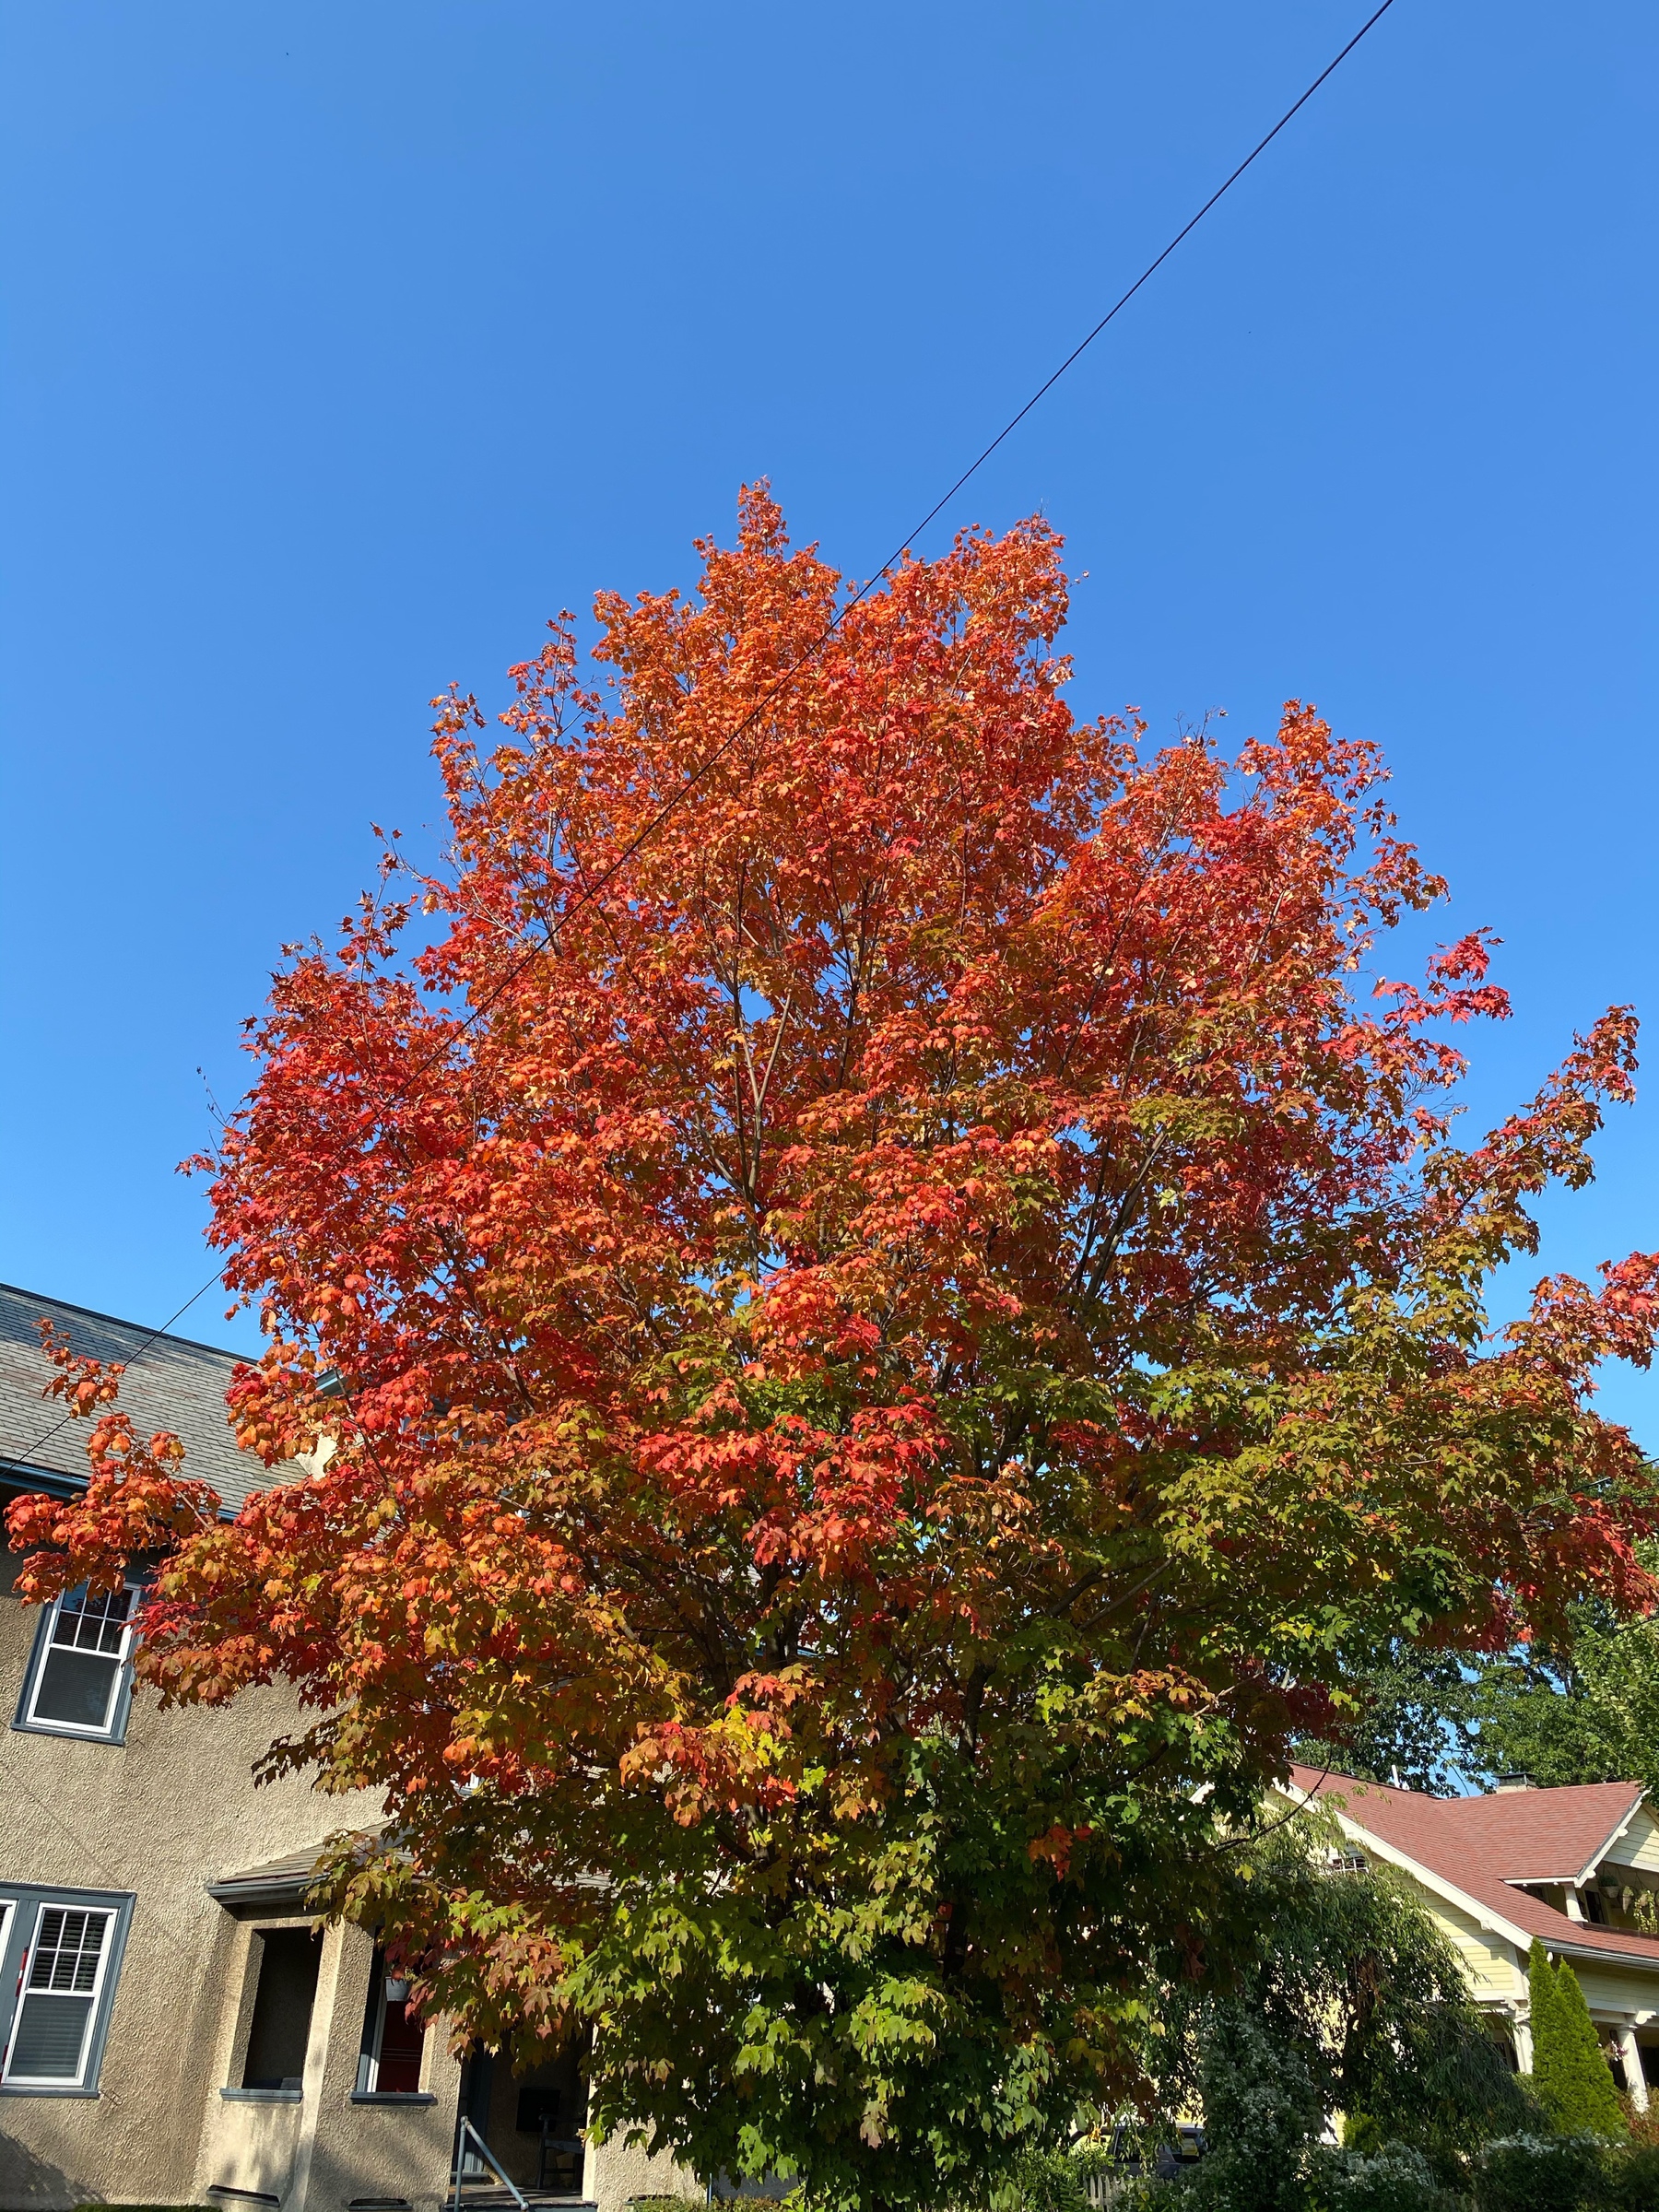 View of a tree in front of a house with bright red leaves above and faded green leaves below, a cloudless blue sky in the background.